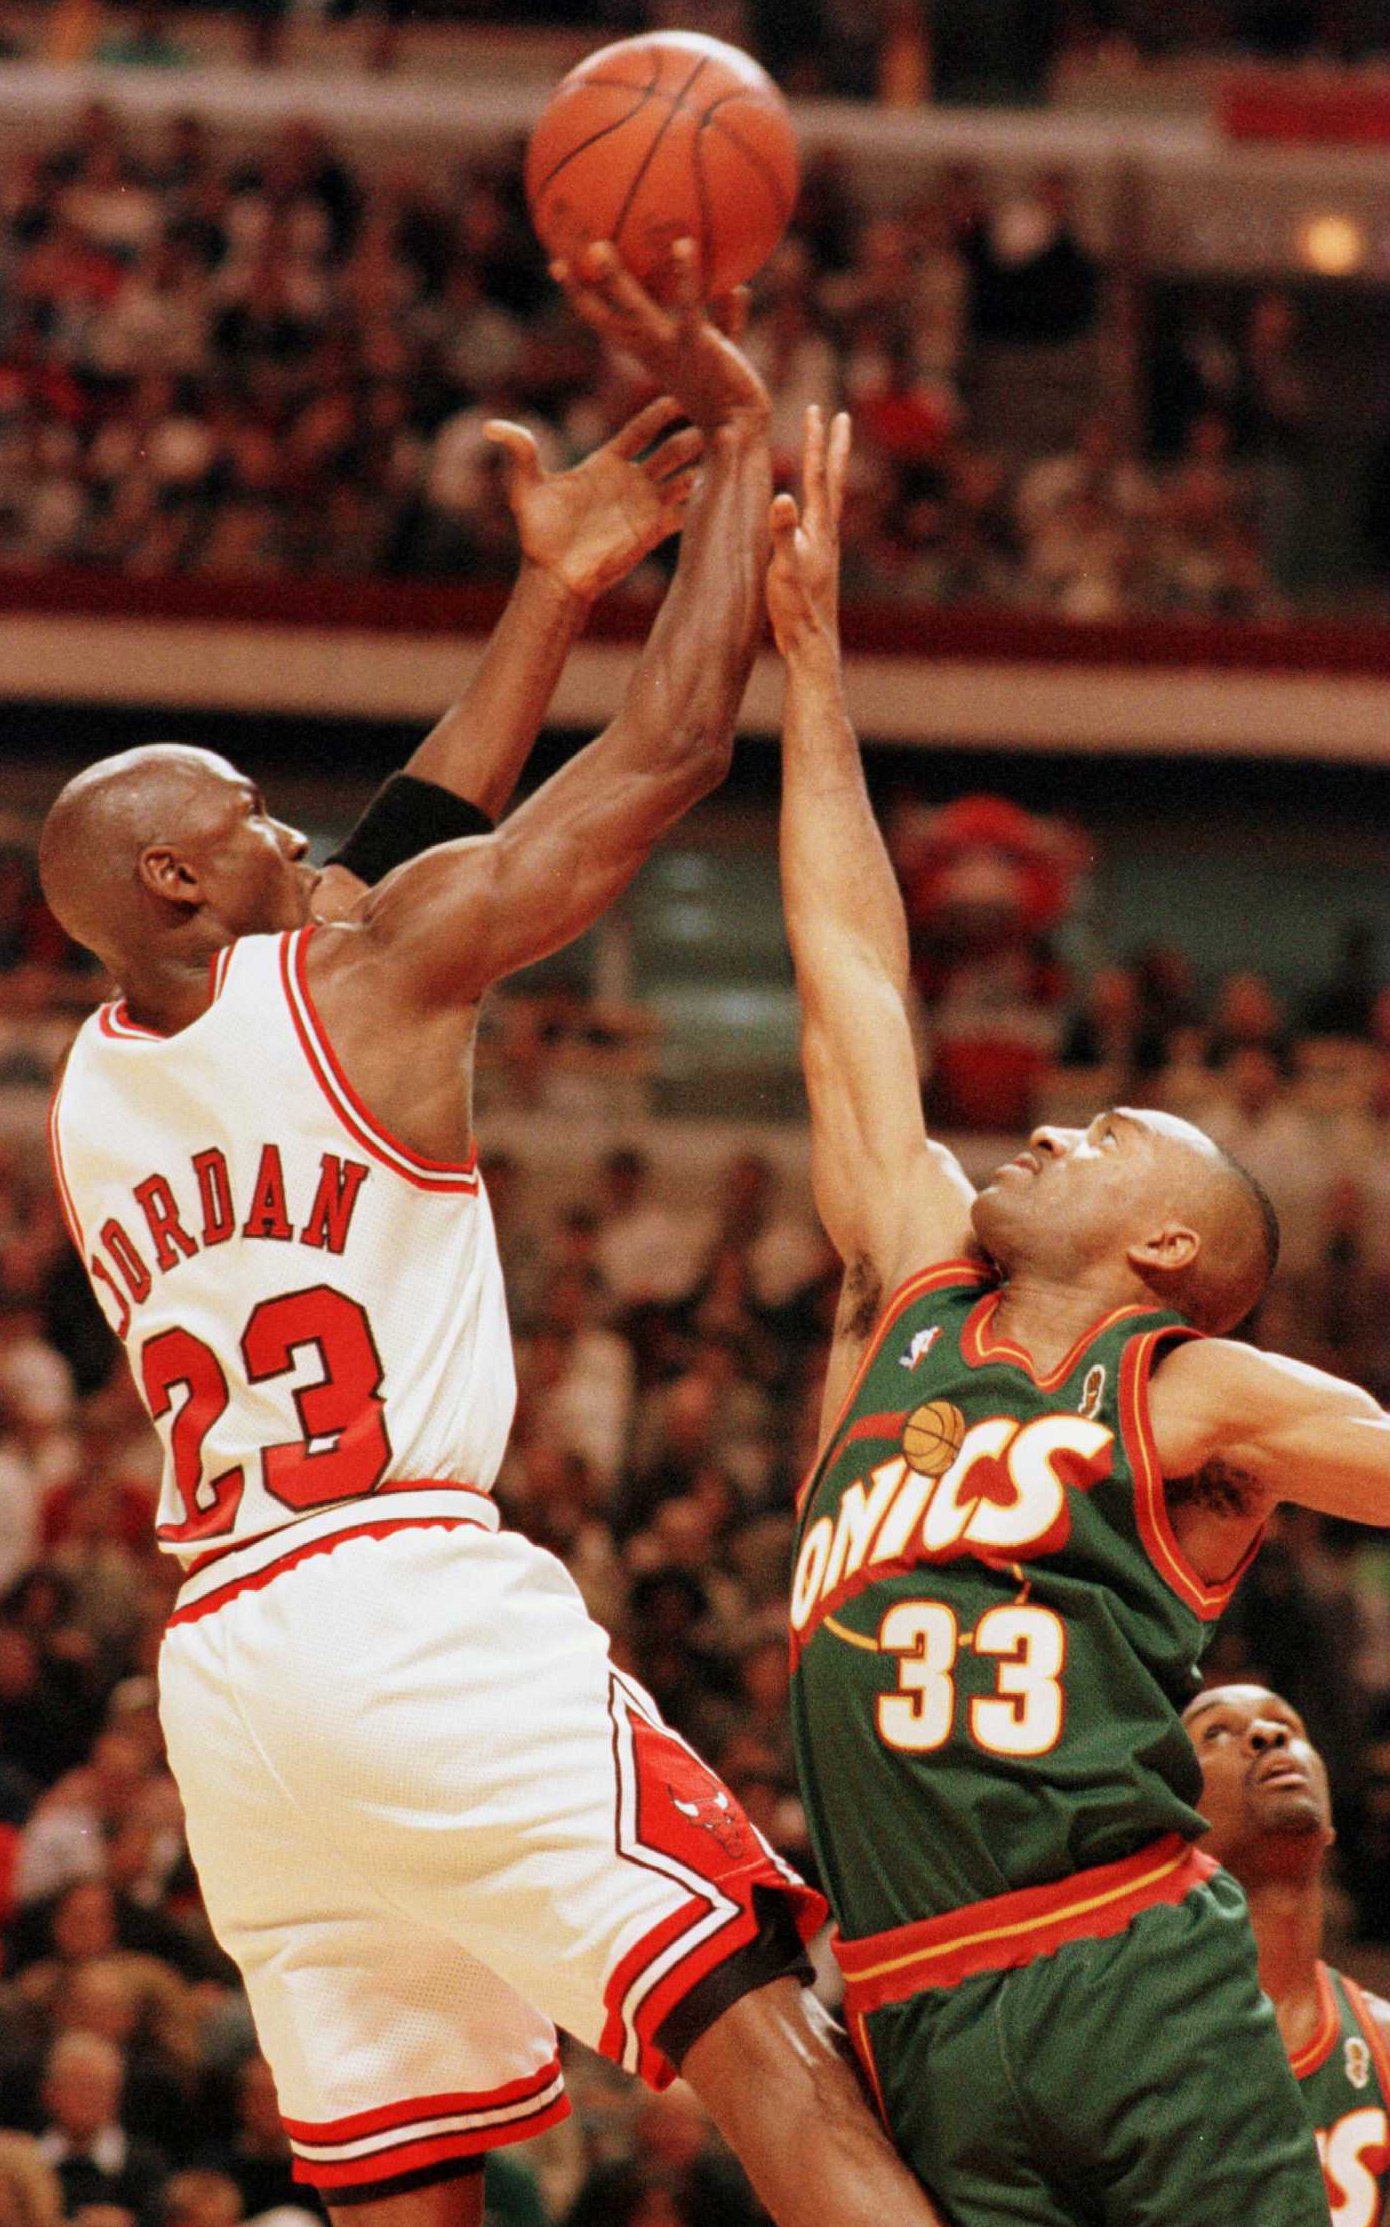 7 Jun 1996:   Michael Jordan #23 of the Chicago Bulls puts up a shot over Hersey Hawkins #33 of the Seattle Supersonics during  third quarter action of game two of the NBA Finals at the United Center in Chicago, Illinois. The Bulls went on to defeat the S